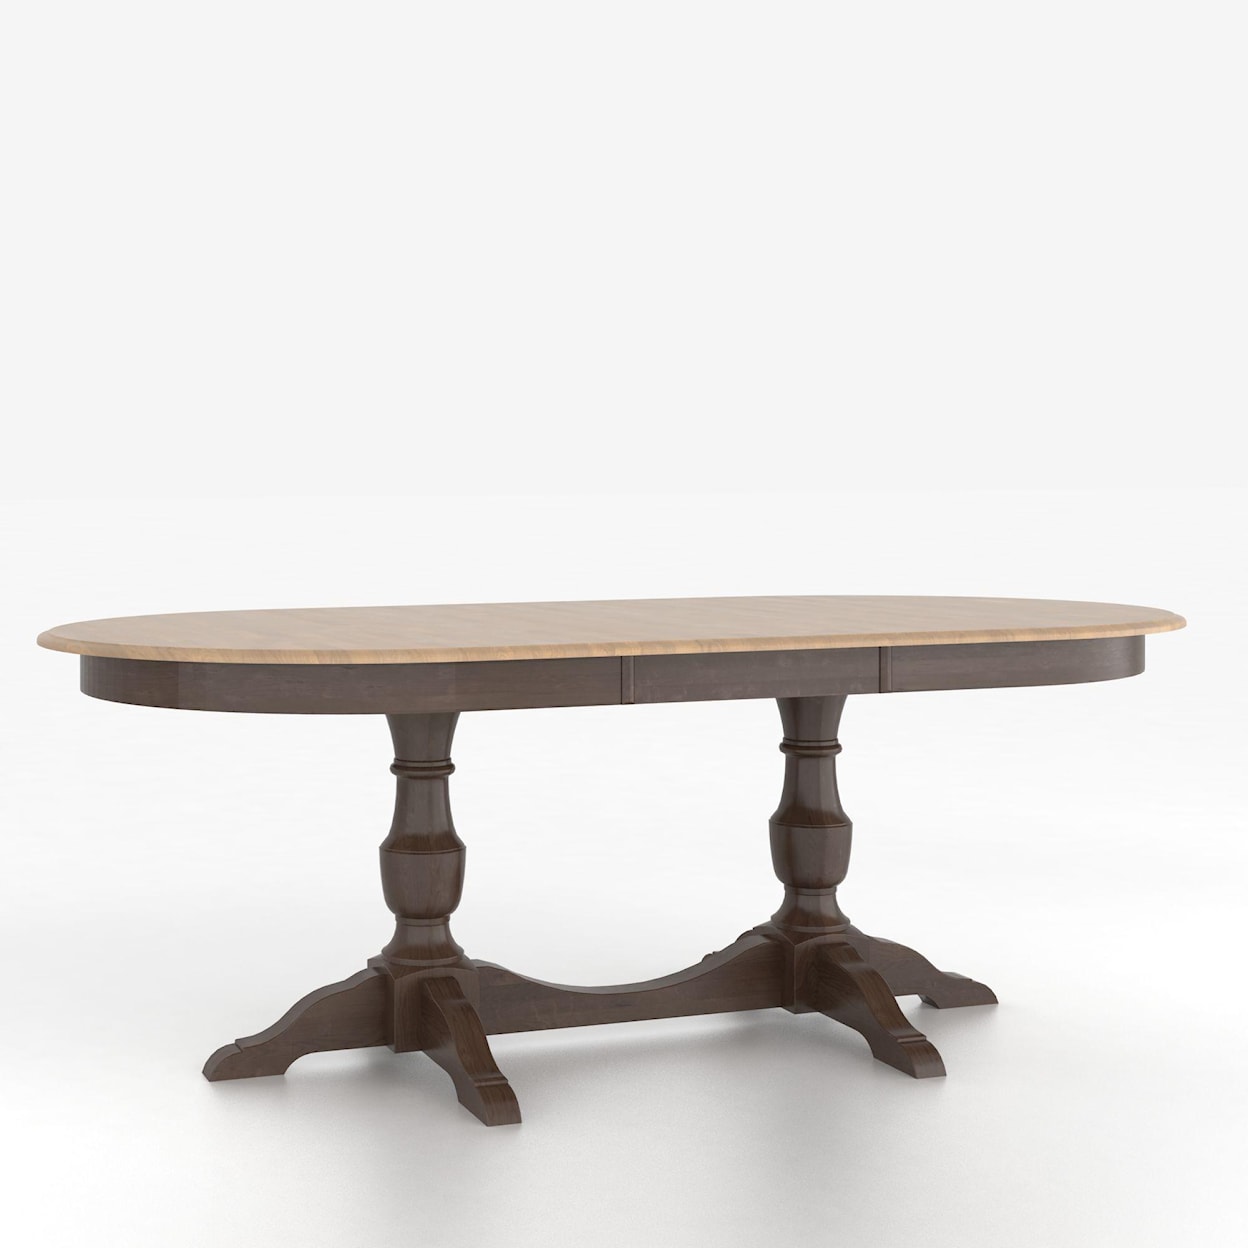 Canadel Canadel Customizable Oval Table